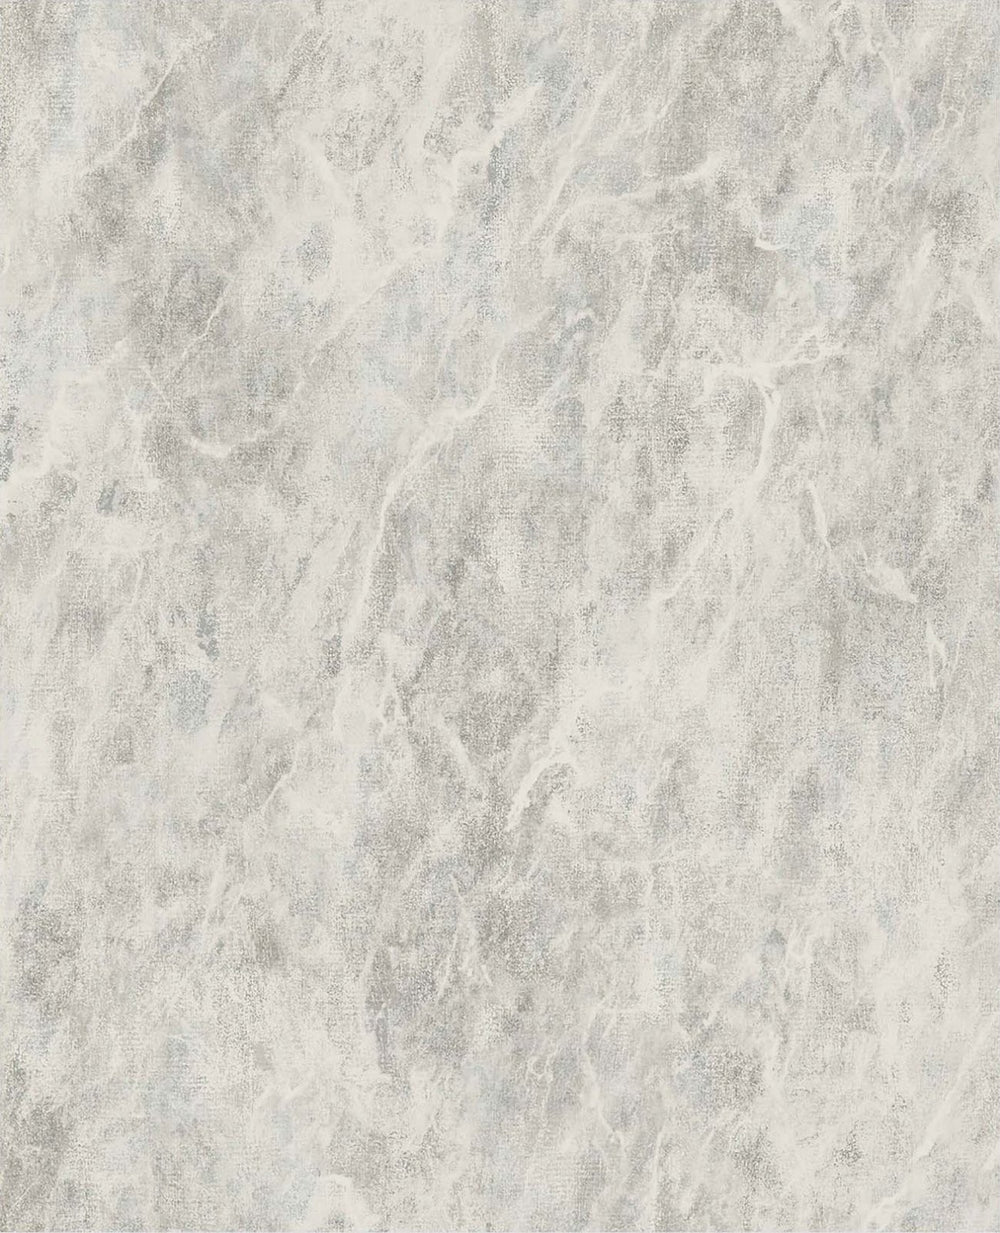 118326-Graham & Brown-Next - Washed Marble Neutral Wallpaper-Decor Warehouse